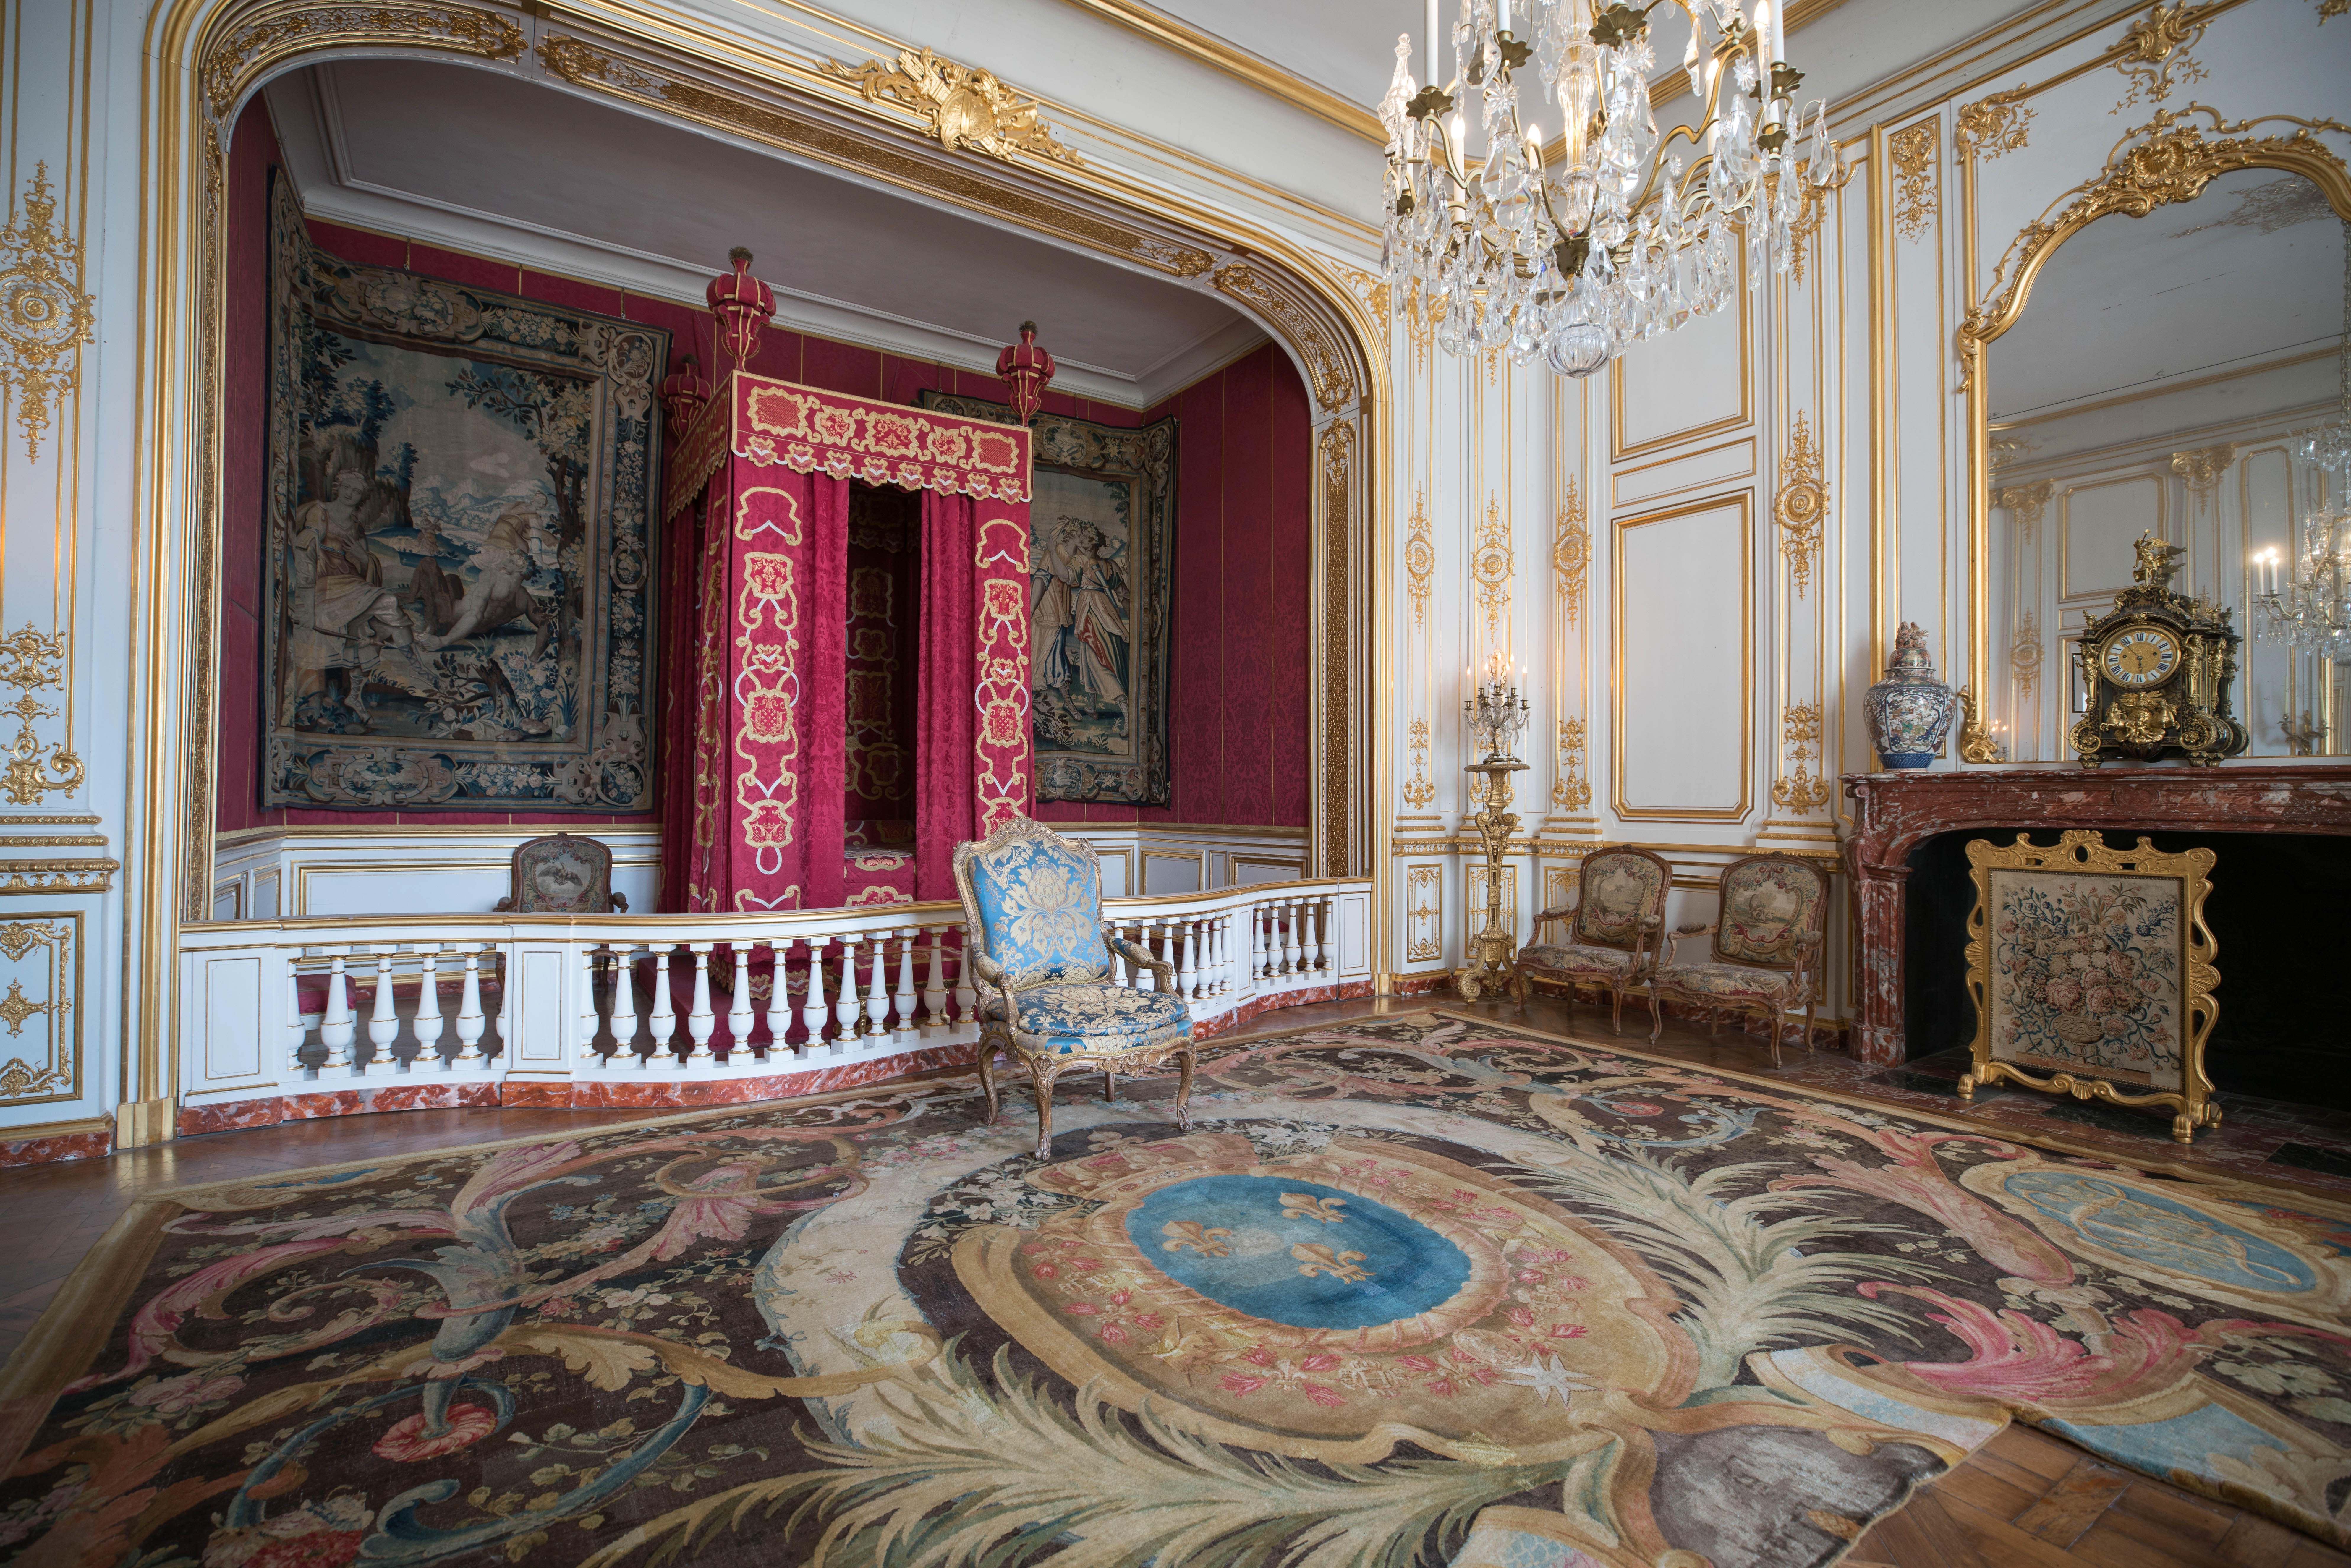 Interior of the chateau